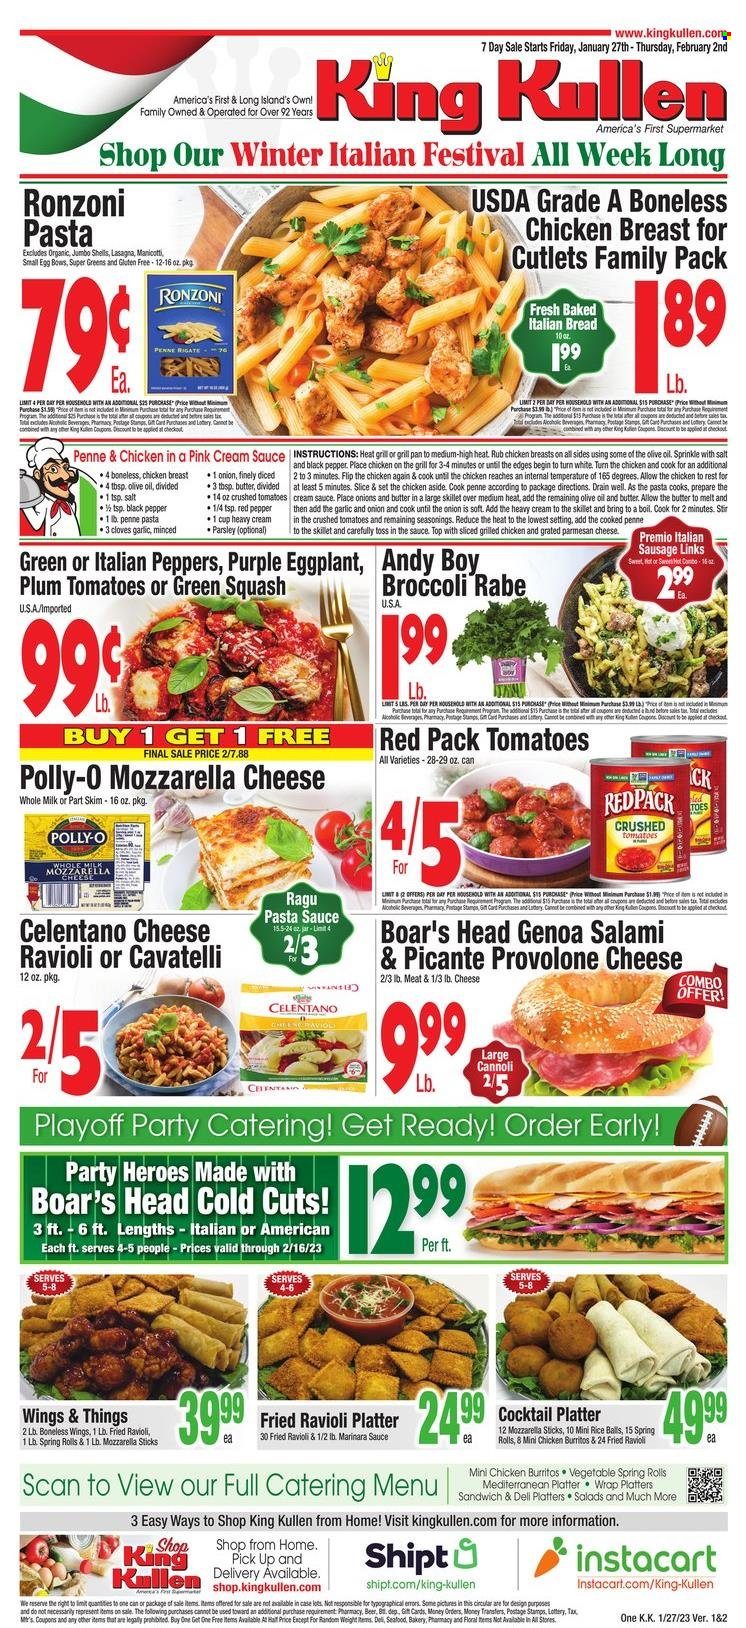 thumbnail - King Kullen Flyer - 01/27/2023 - 02/02/2023 - Sales products - bread, broccoli, garlic, zucchini, parsley, broccolini, seafood, ravioli, pasta sauce, sandwich, spring rolls, burrito, lasagna meal, ragú pasta, salami, sausage, italian sausage, mozzarella, parmesan, cheese, Provolone, milk, eggs, butter, rice balls, crushed tomatoes, penne, black pepper, cloves, ragu, olive oil, beer, chicken breasts. Page 1.